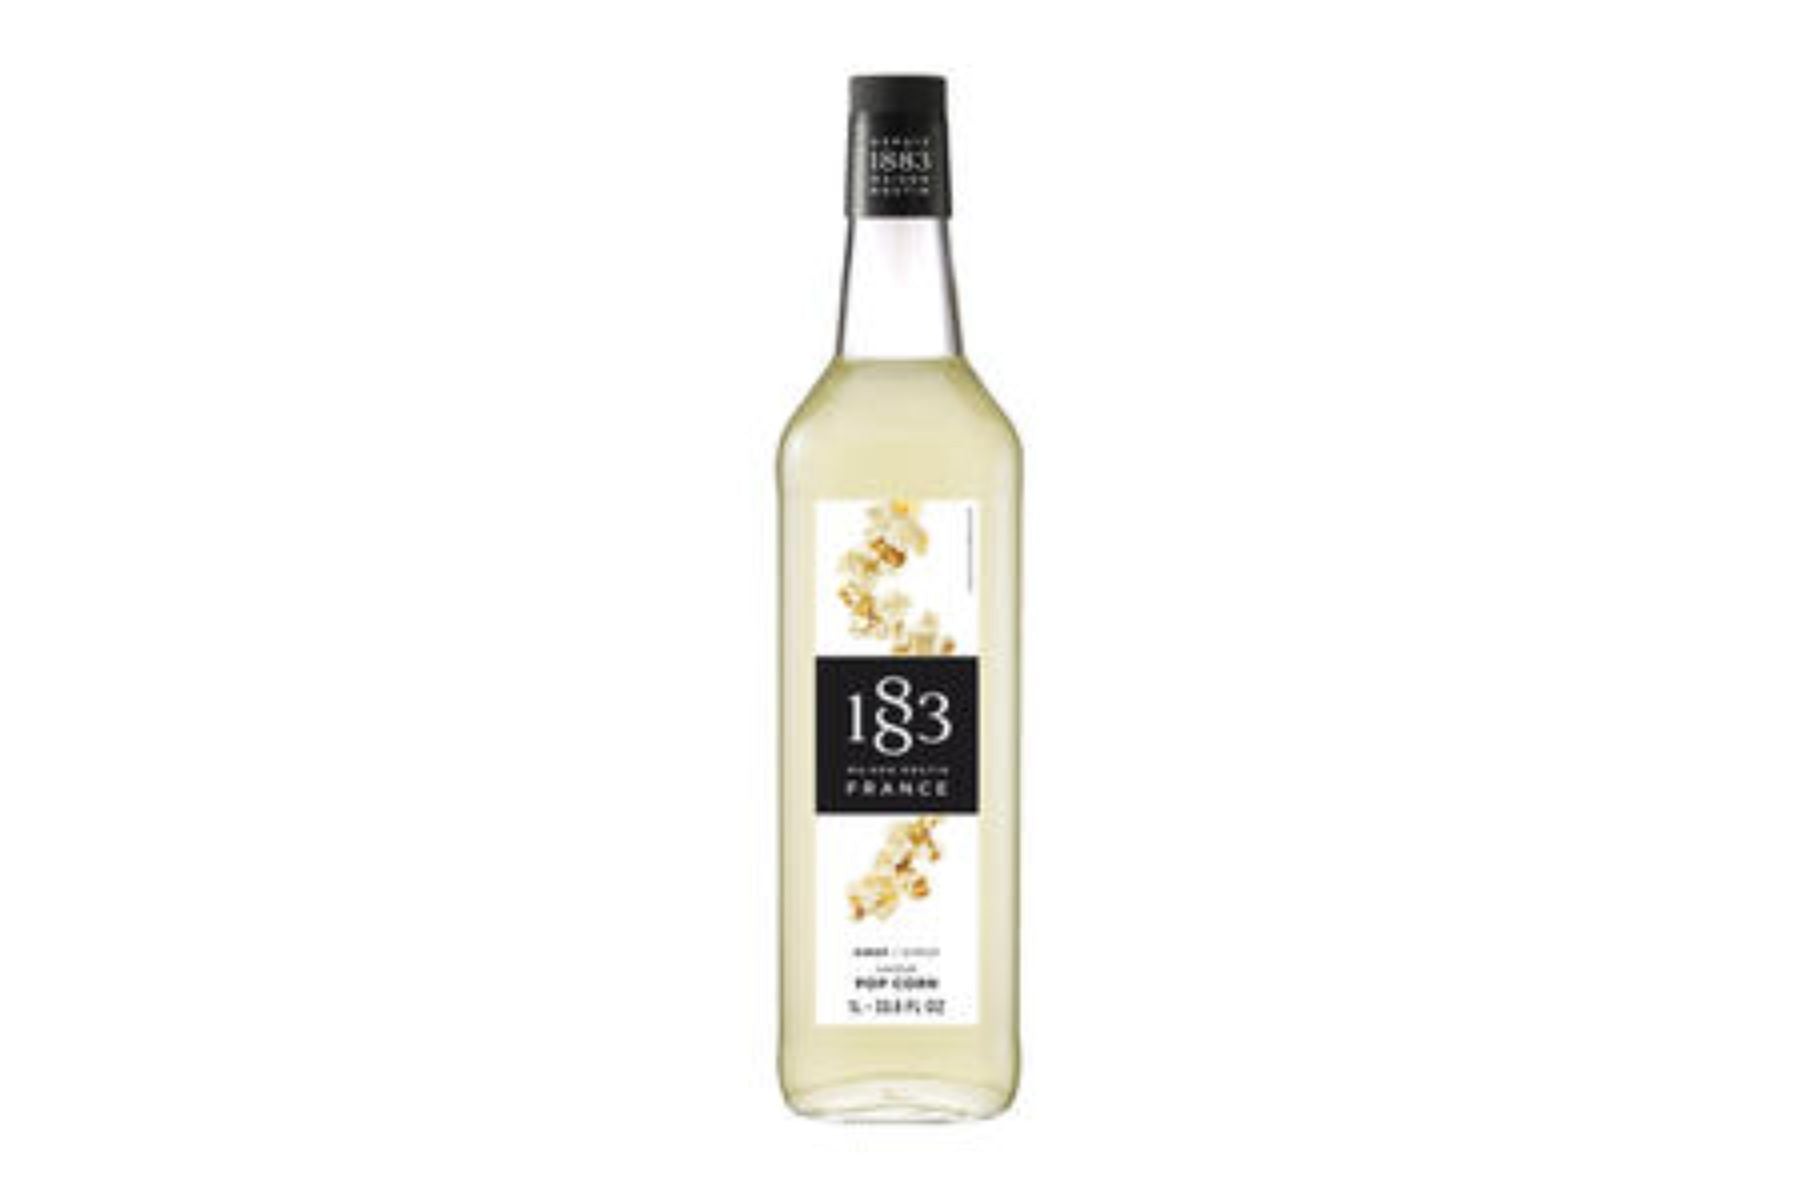 1883 Classic Flavored Syrups - 1L GLASS Bottle: Popcorn